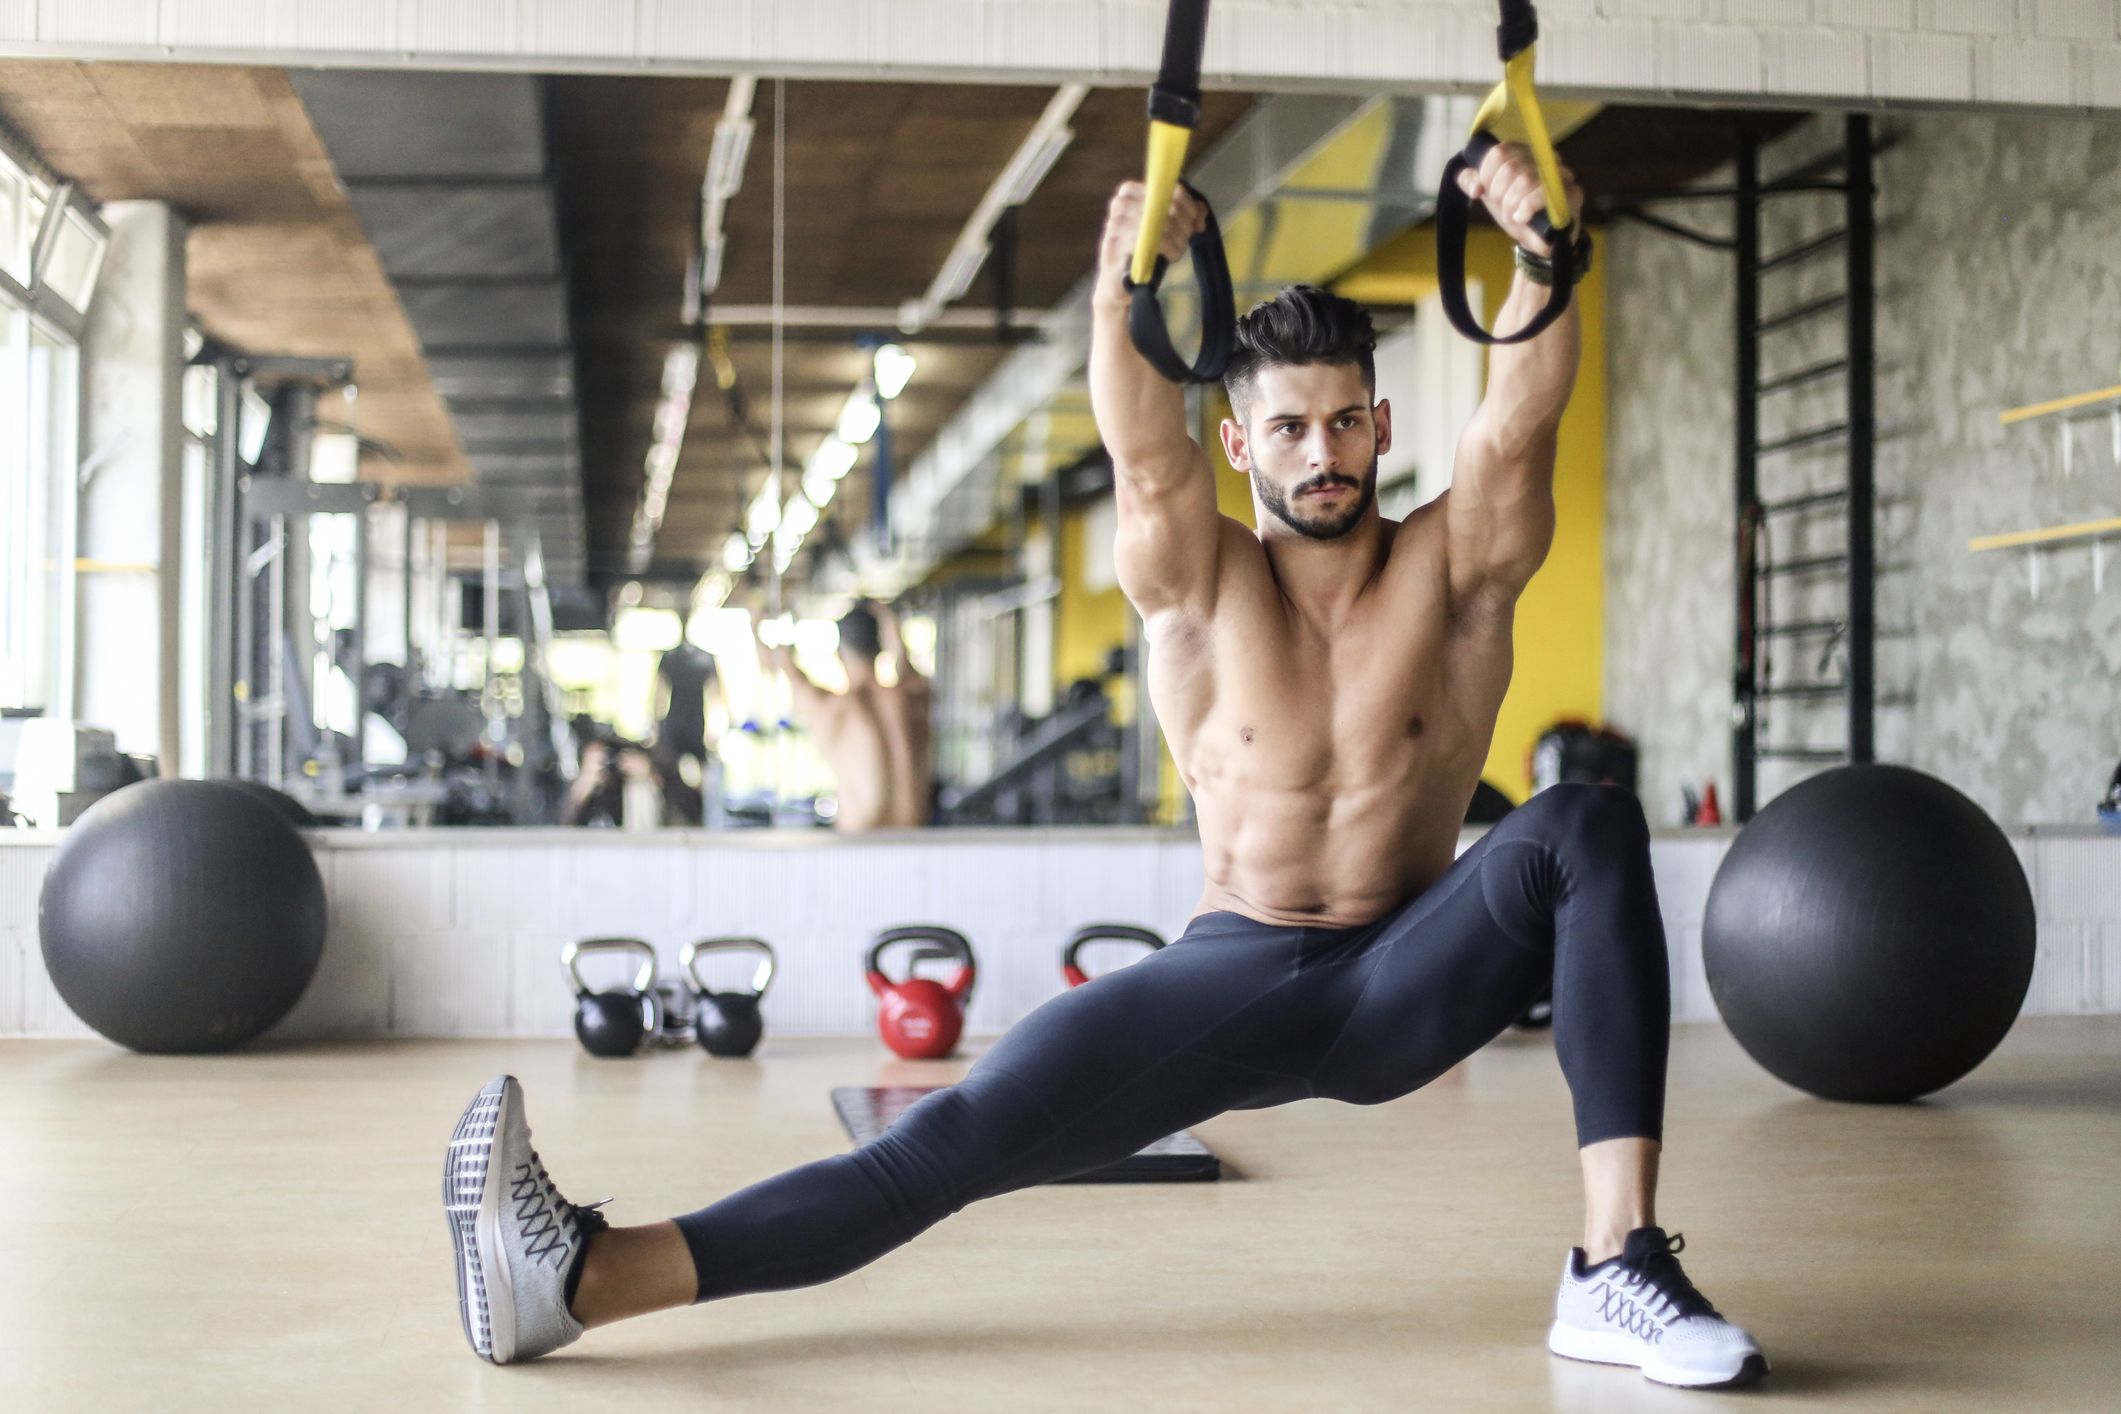 Suspension Trainer Straps Workout - Sports & Fitness > Home Fitness